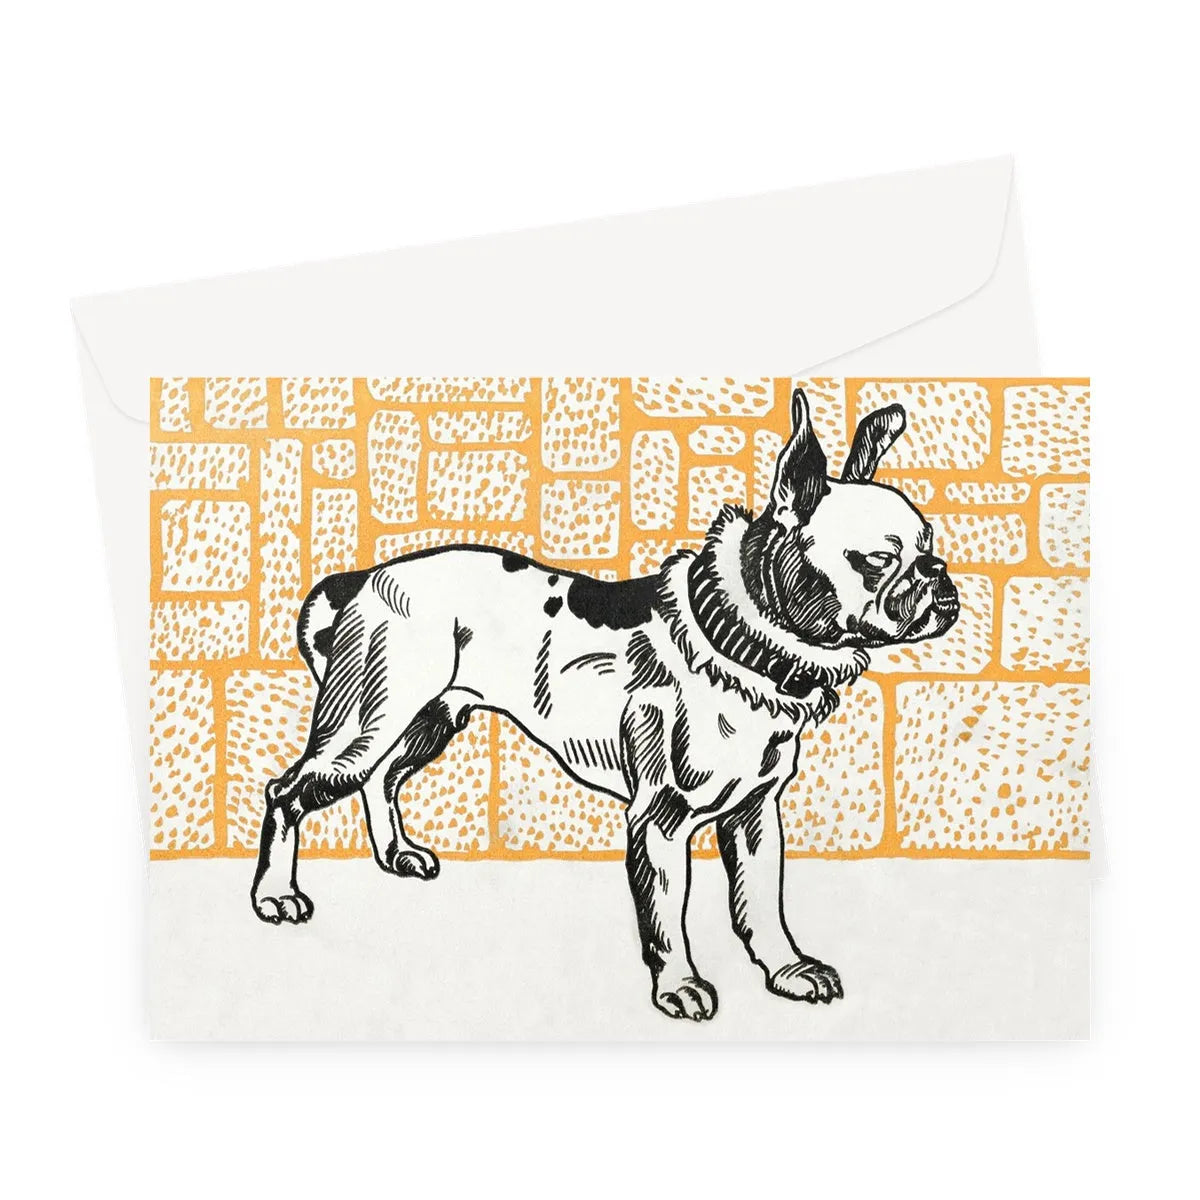 Pitbull Terrier By Moriz Jung Greeting Card - A5 Landscape / 1 Card - Notebooks & Notepads - Aesthetic Art